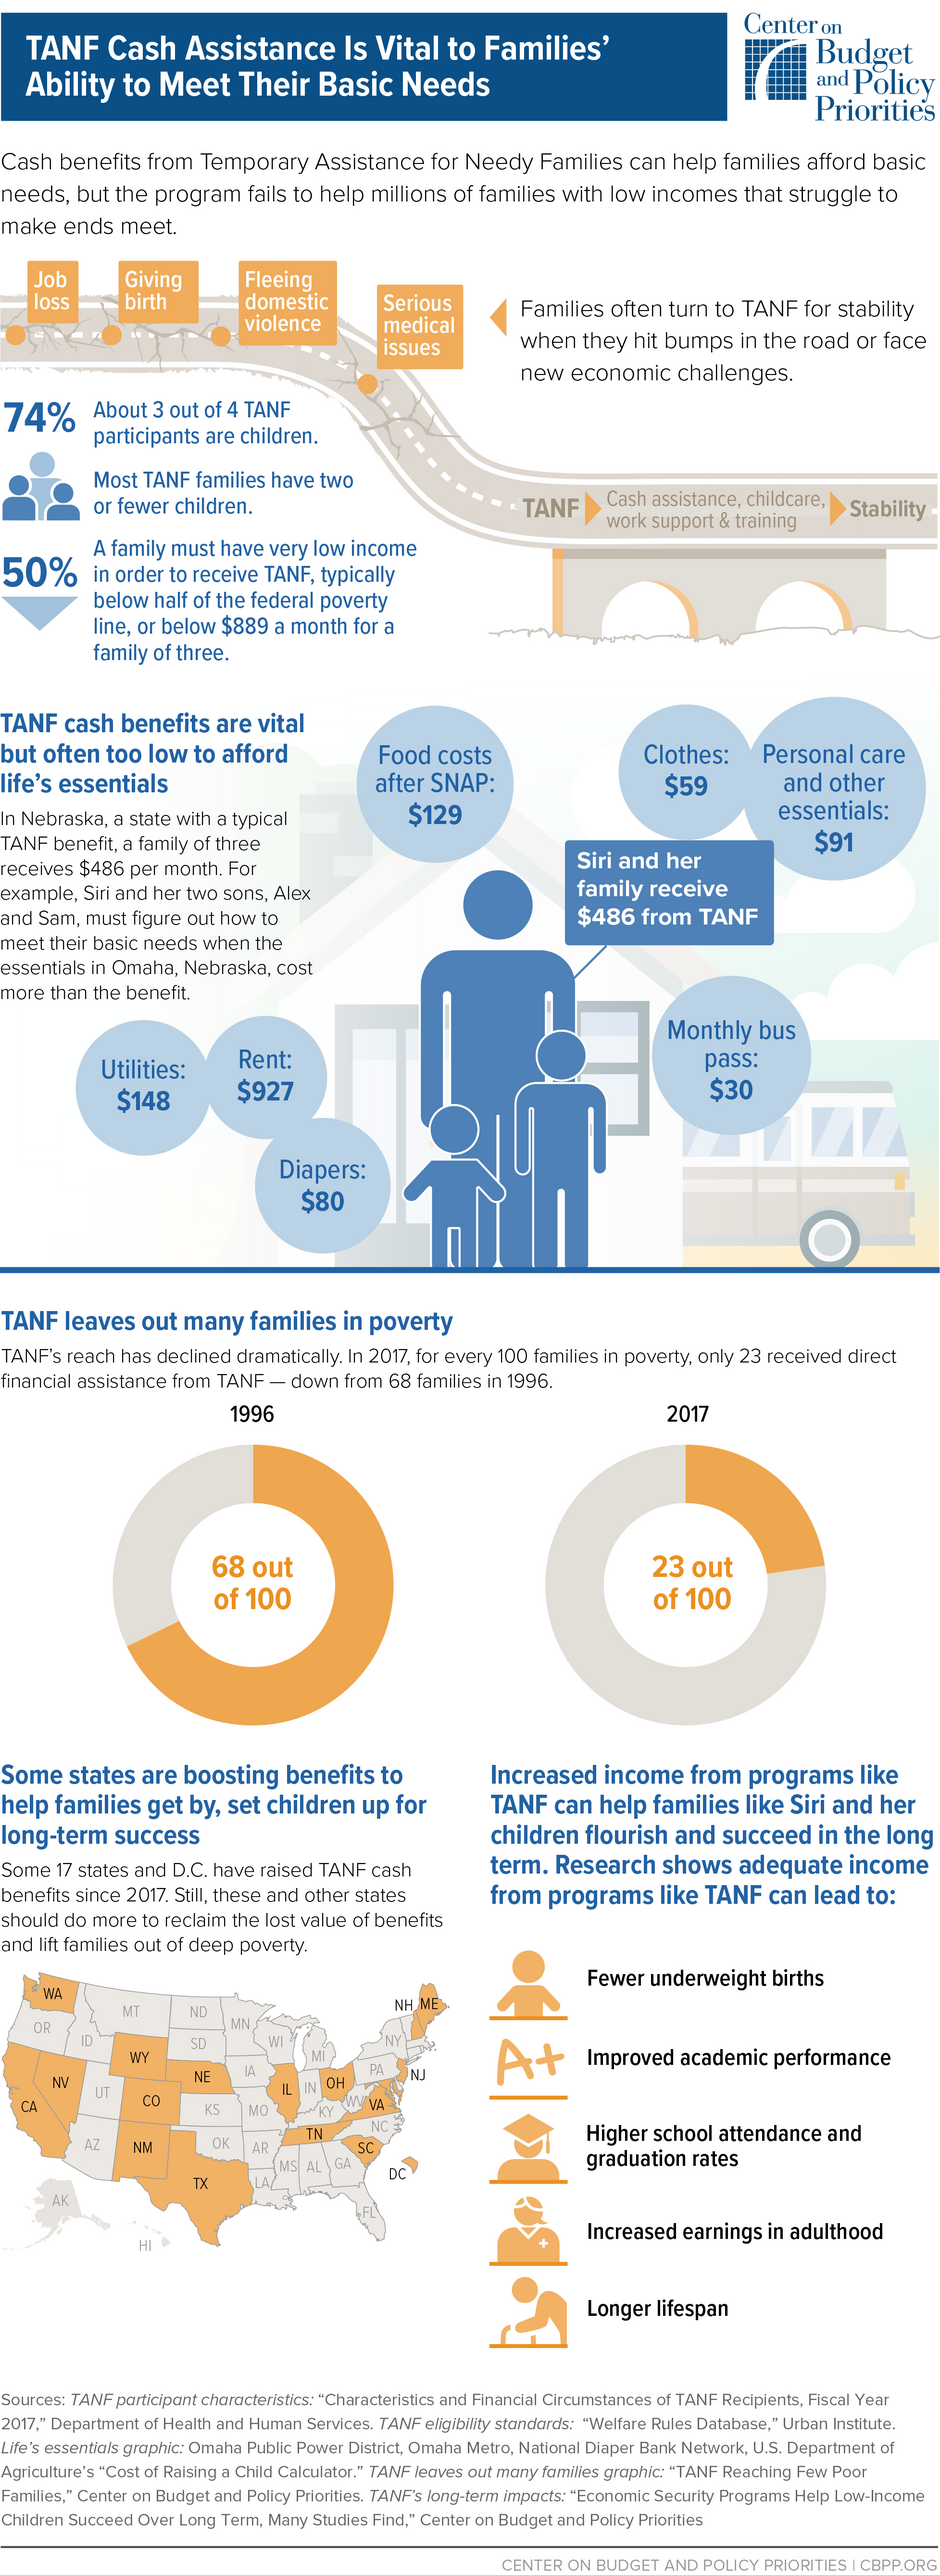 Infographic: TANF Cash Assistance Is Vital to Families’Ability to Meet Their Basic Needs